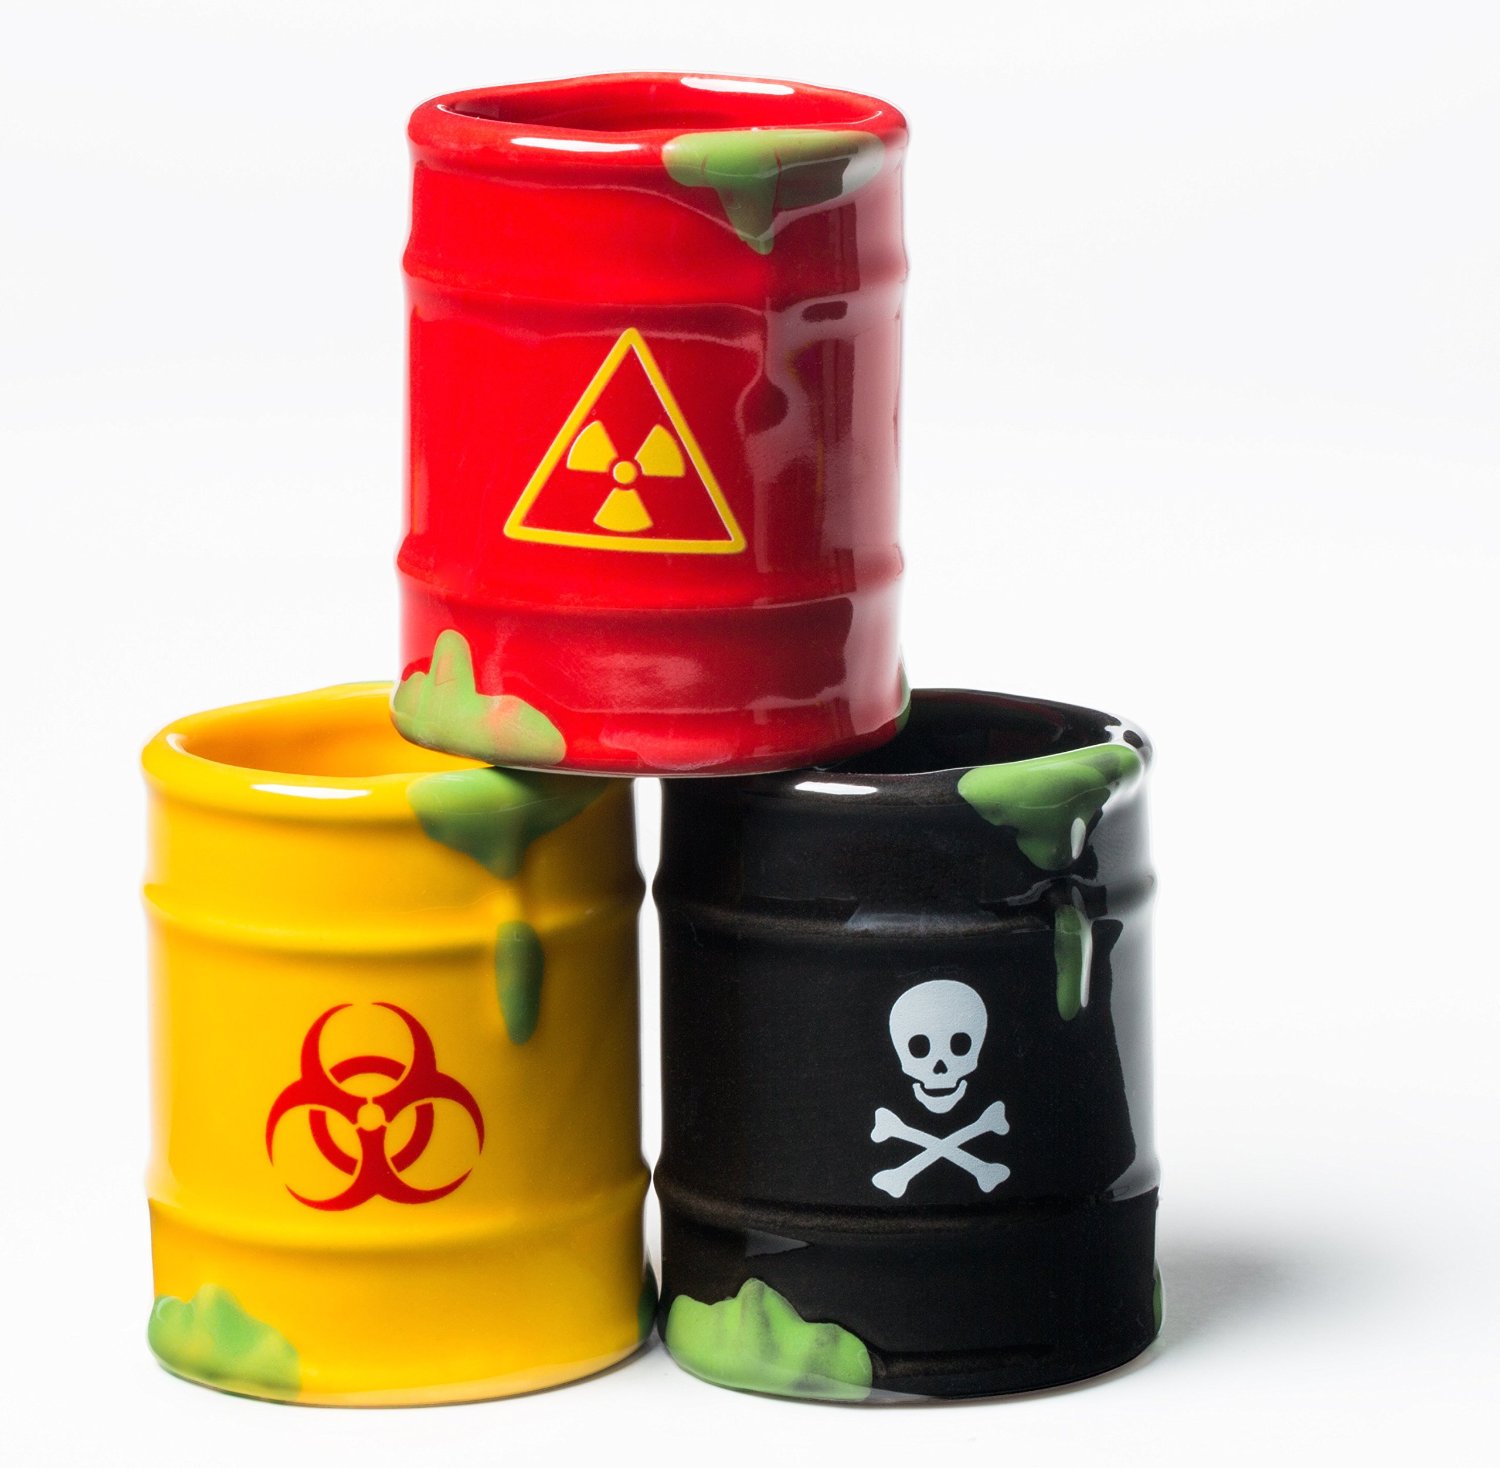 Toxic Waste Shot Glasses for Illusion-Free Partying